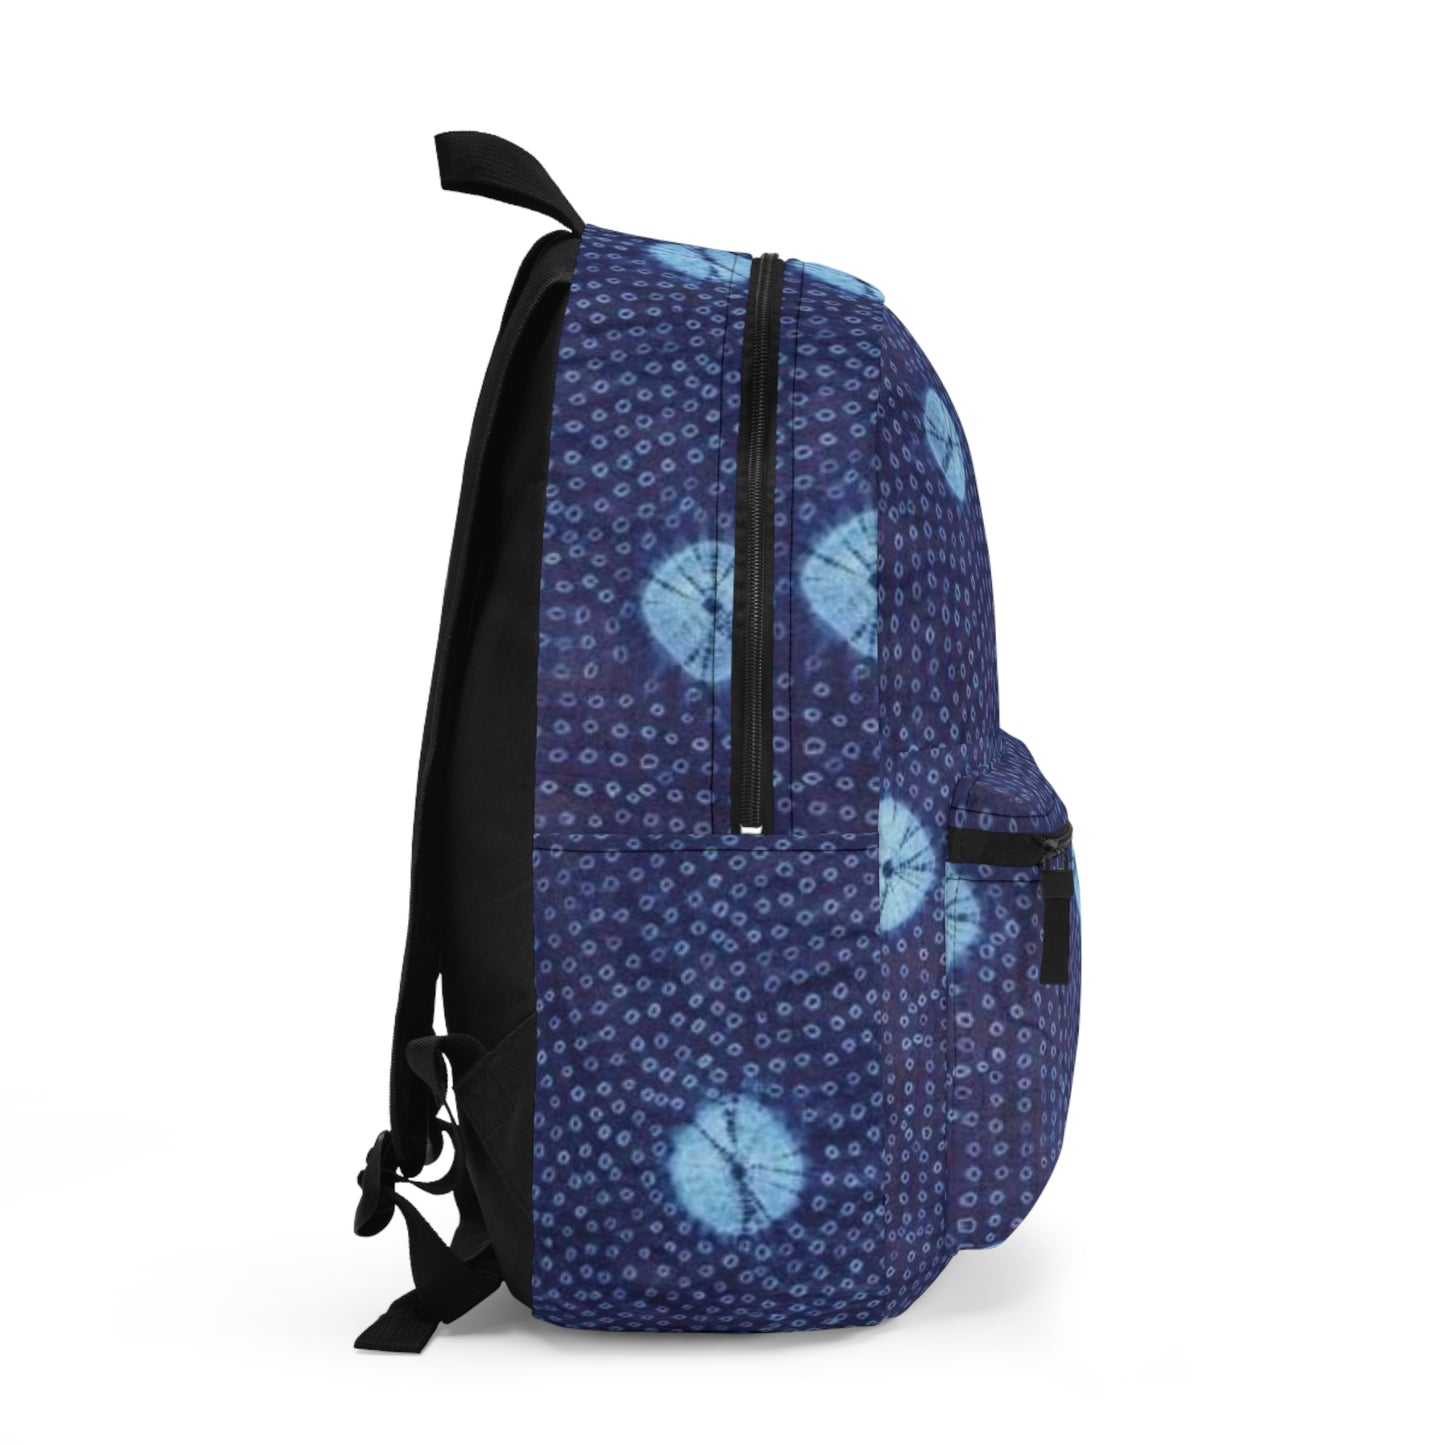 Moon and Stars Backpack